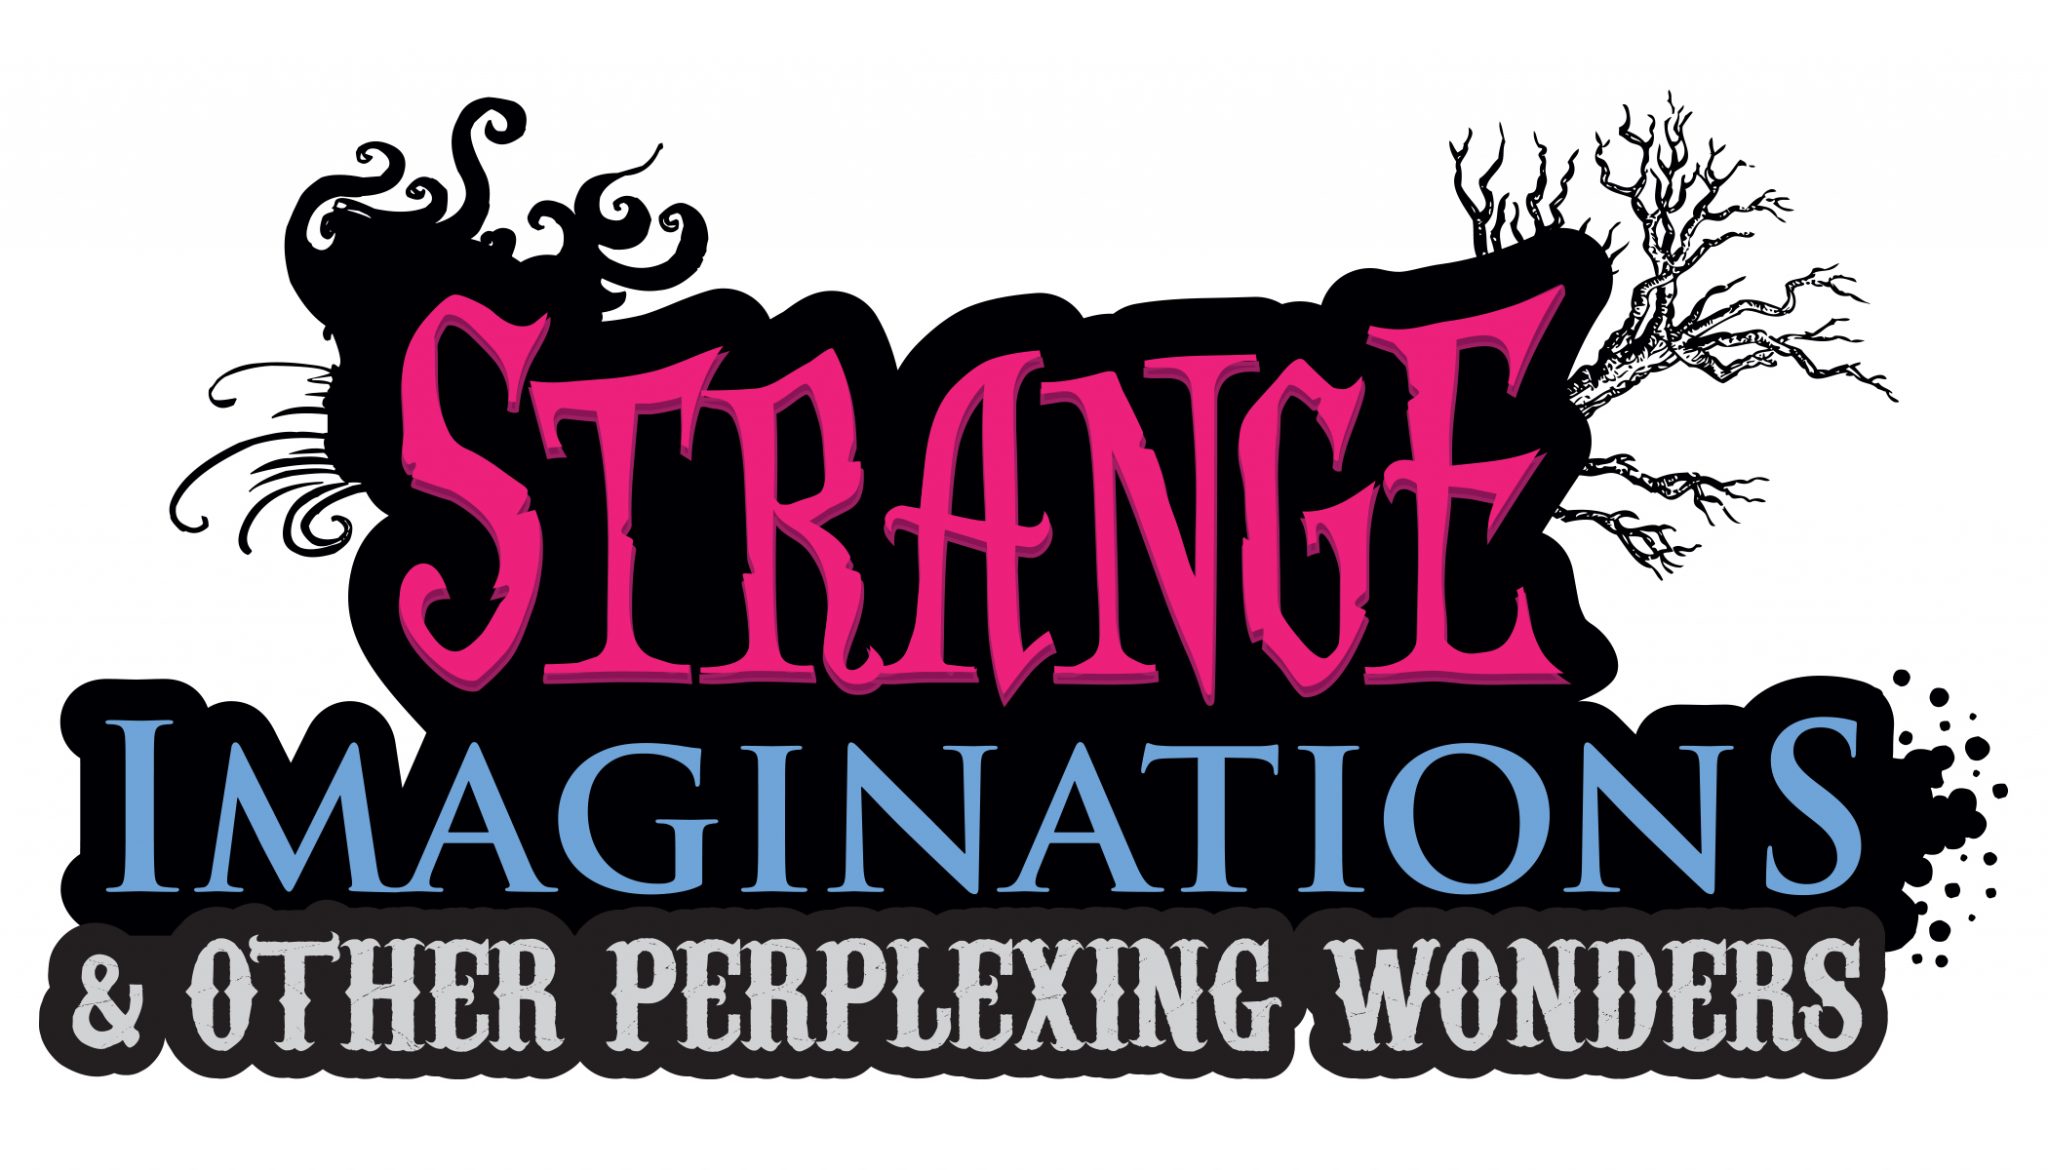 Strange Imaginations and Other Perplexing Wonders